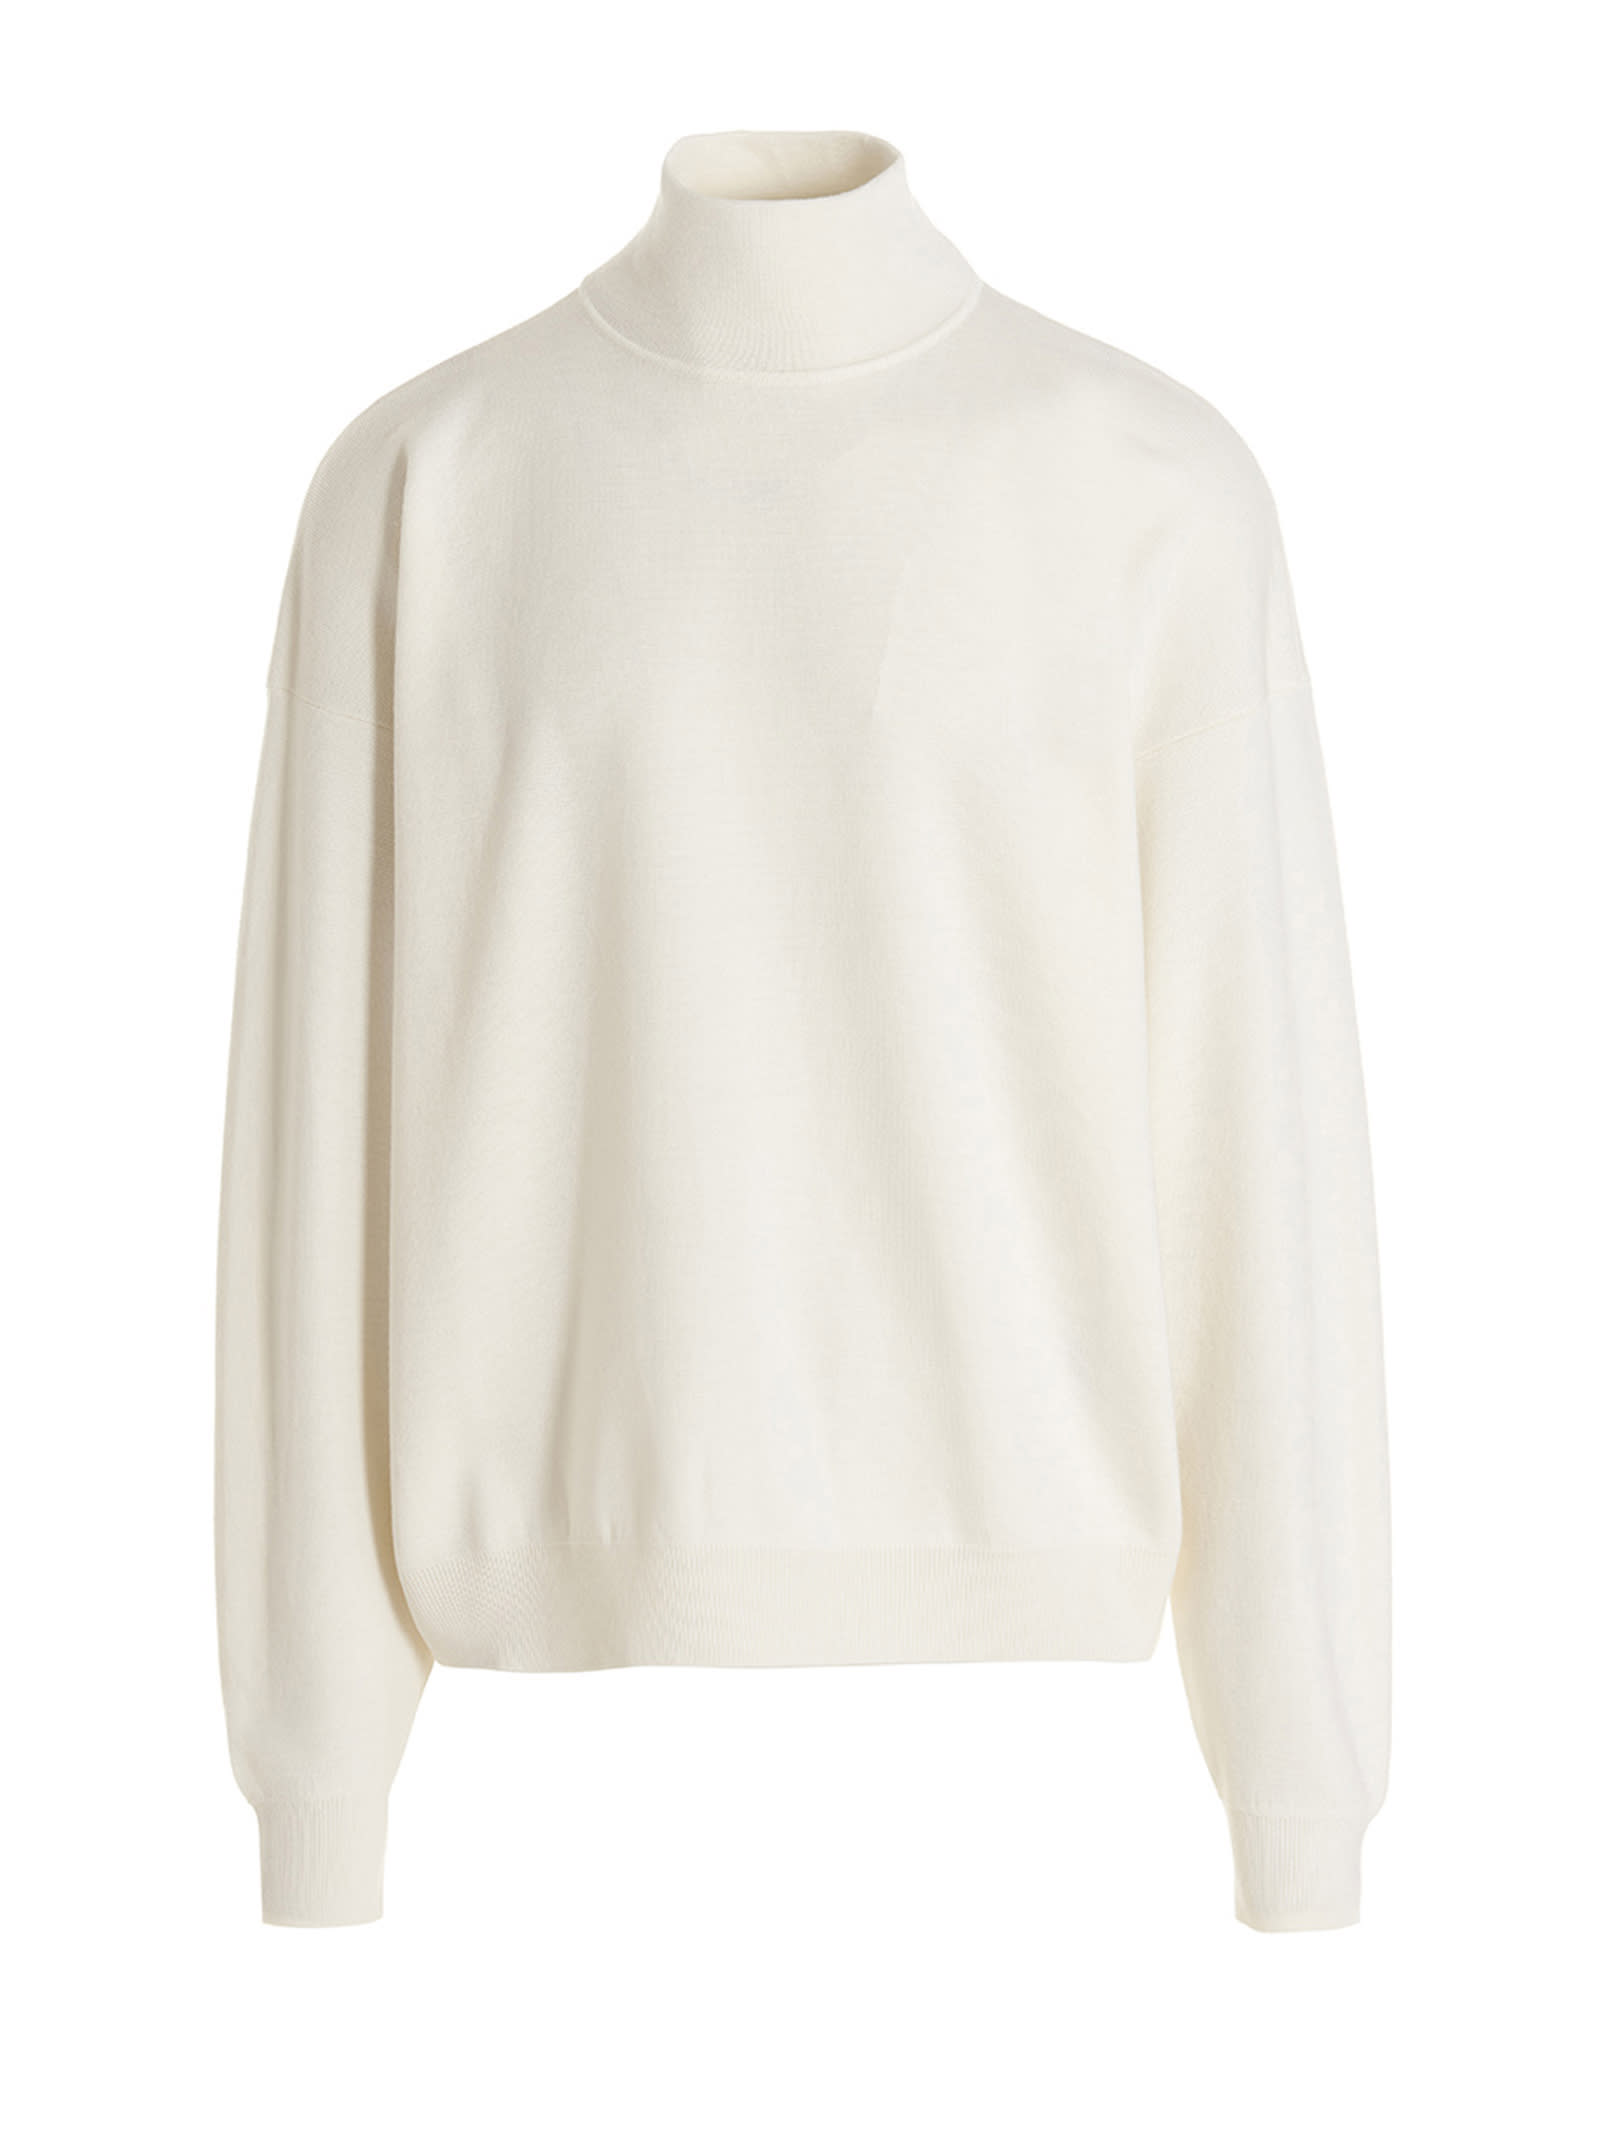 FEAR OF GOD HIGH NECK SWEATER